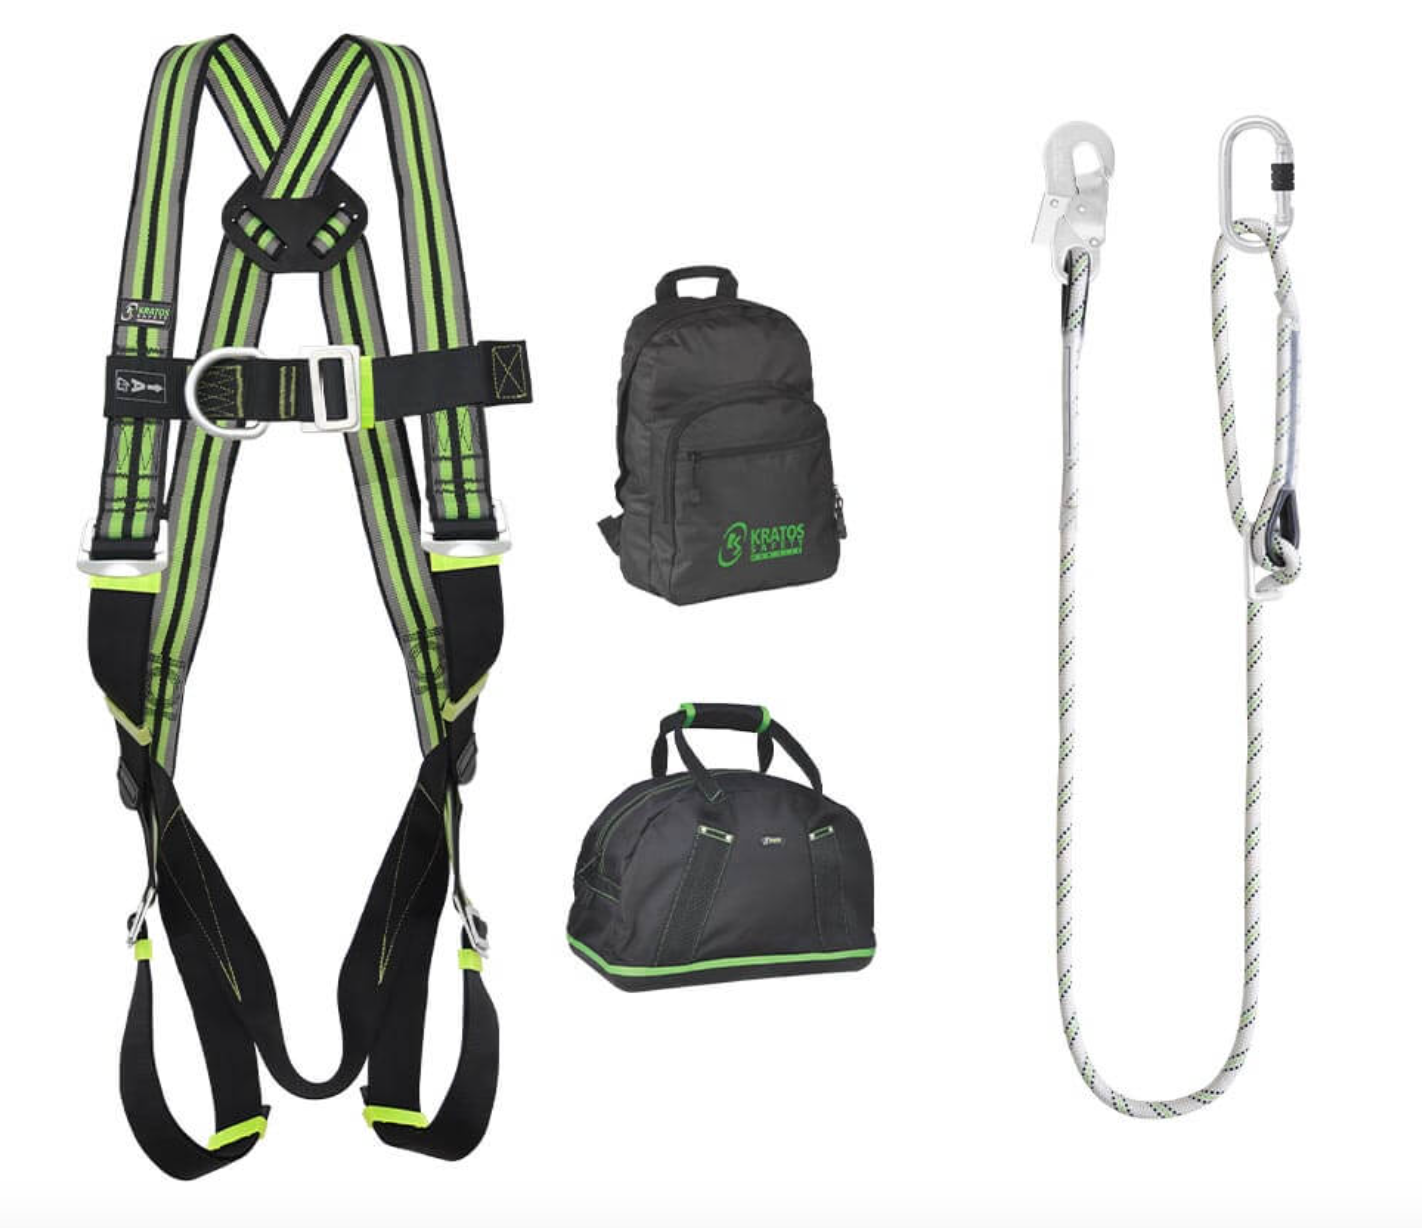 2 Point Safety Harness Restraint Kit